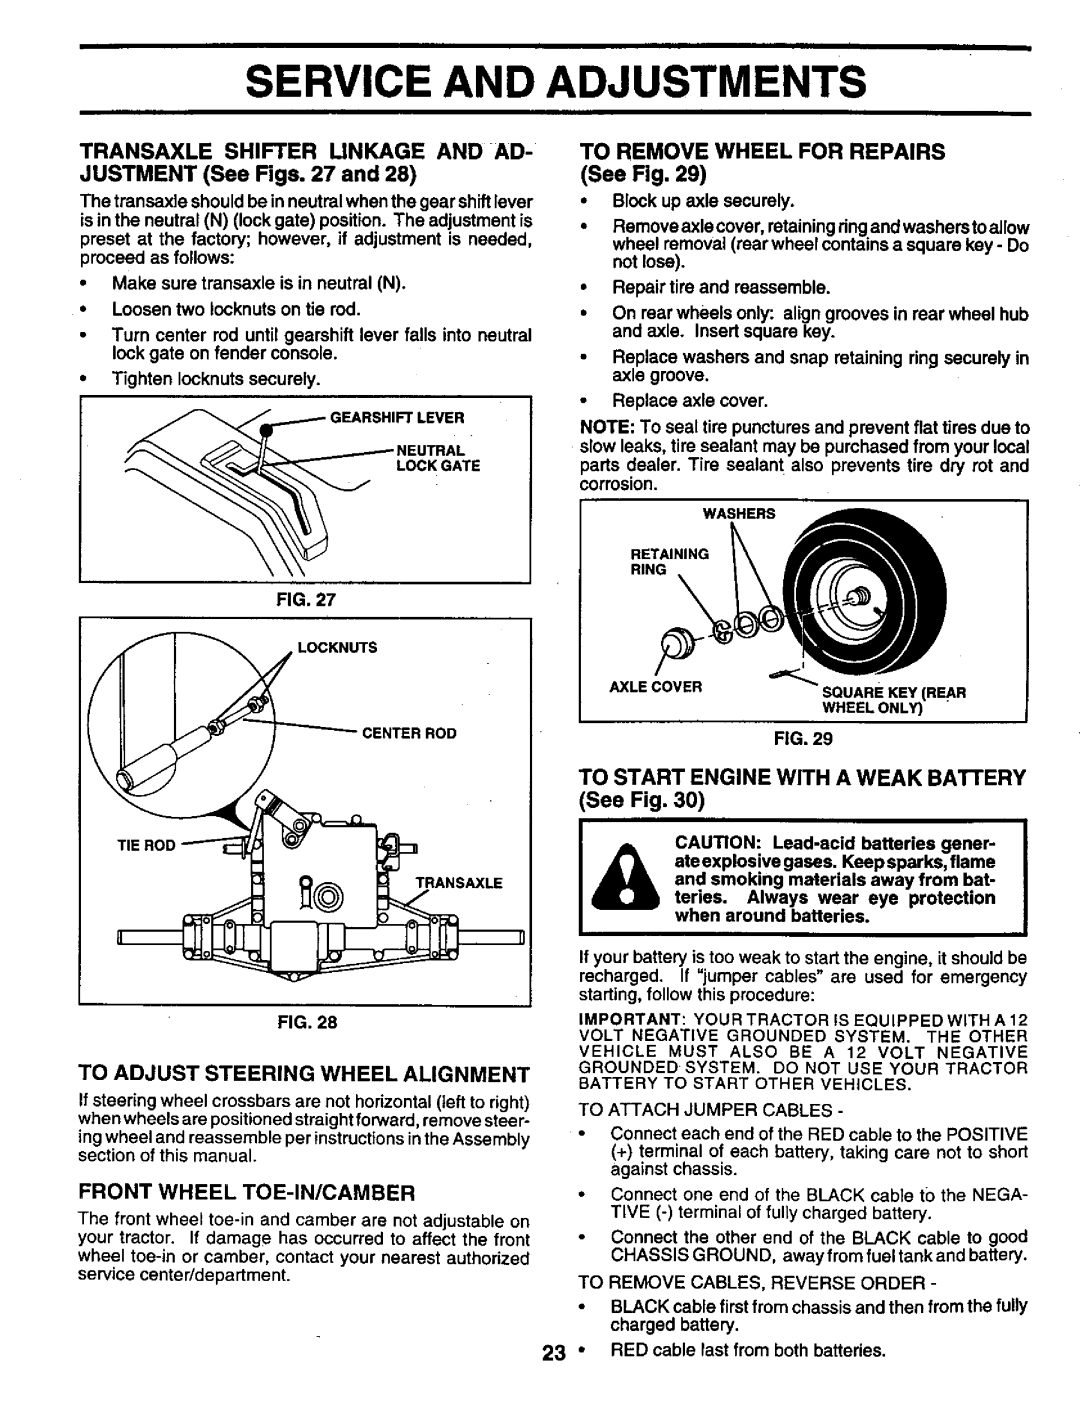 Craftsman 917.259561 owner manual Wheelon_, D_ _, TO REMOVE WHEEL FOR REPAIRS See Fig, _,=__, Service And Adjustments 